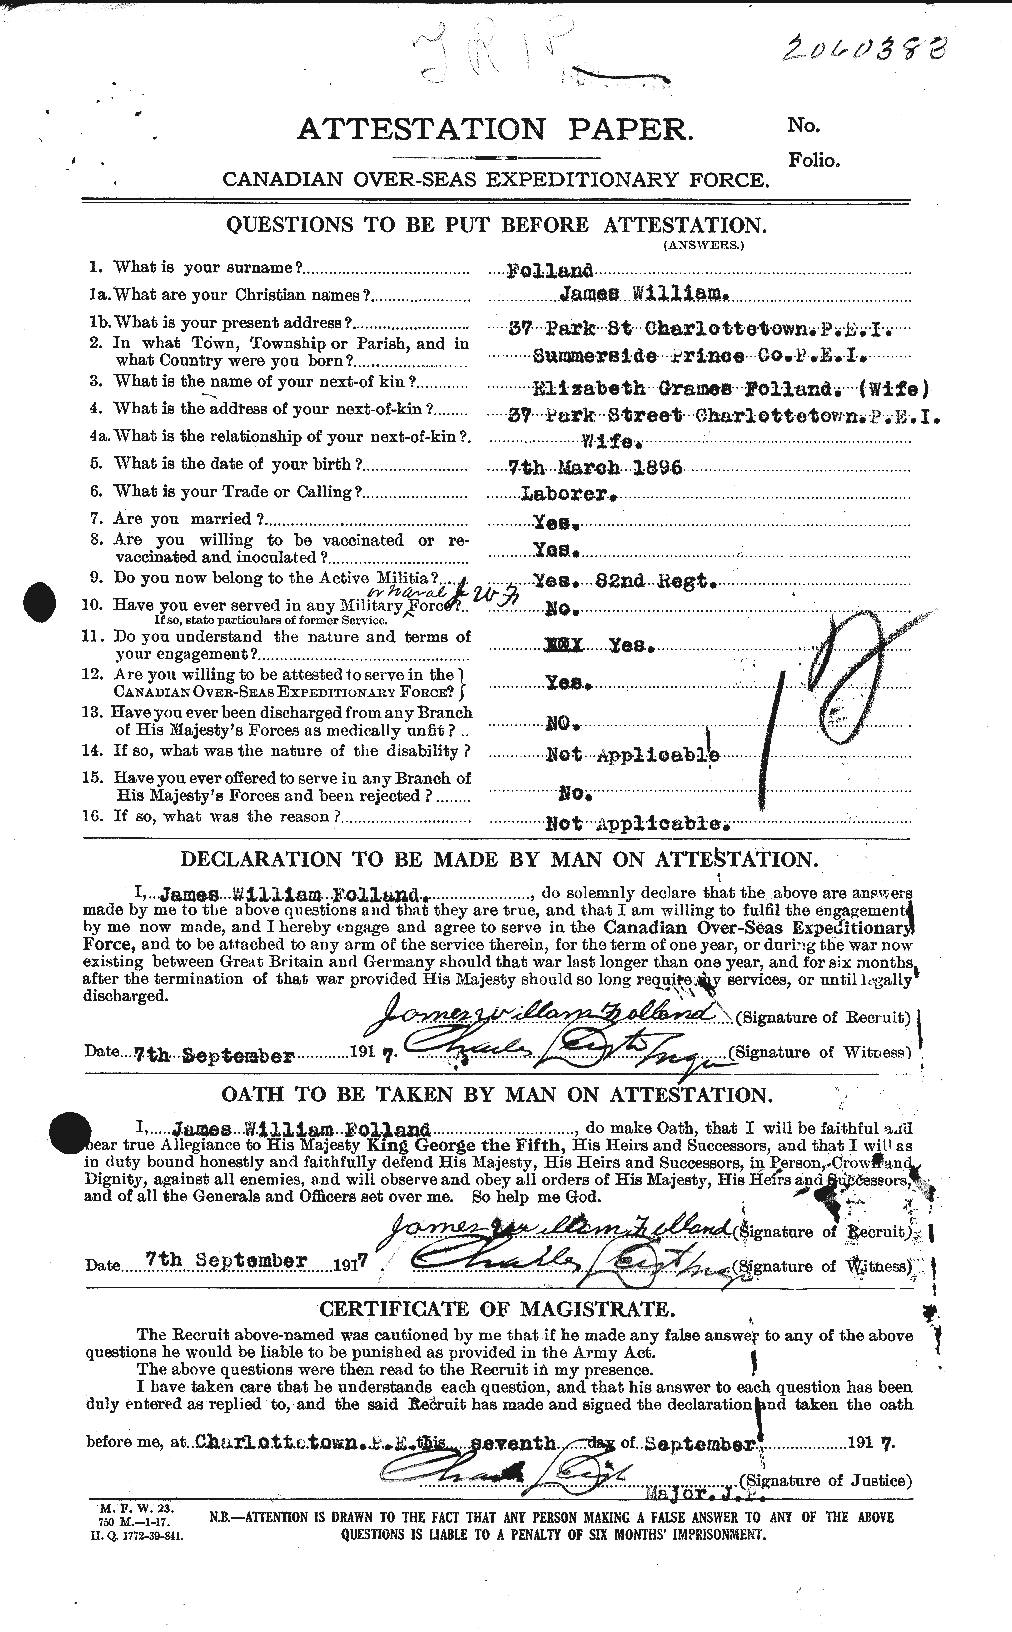 Personnel Records of the First World War - CEF 327682a